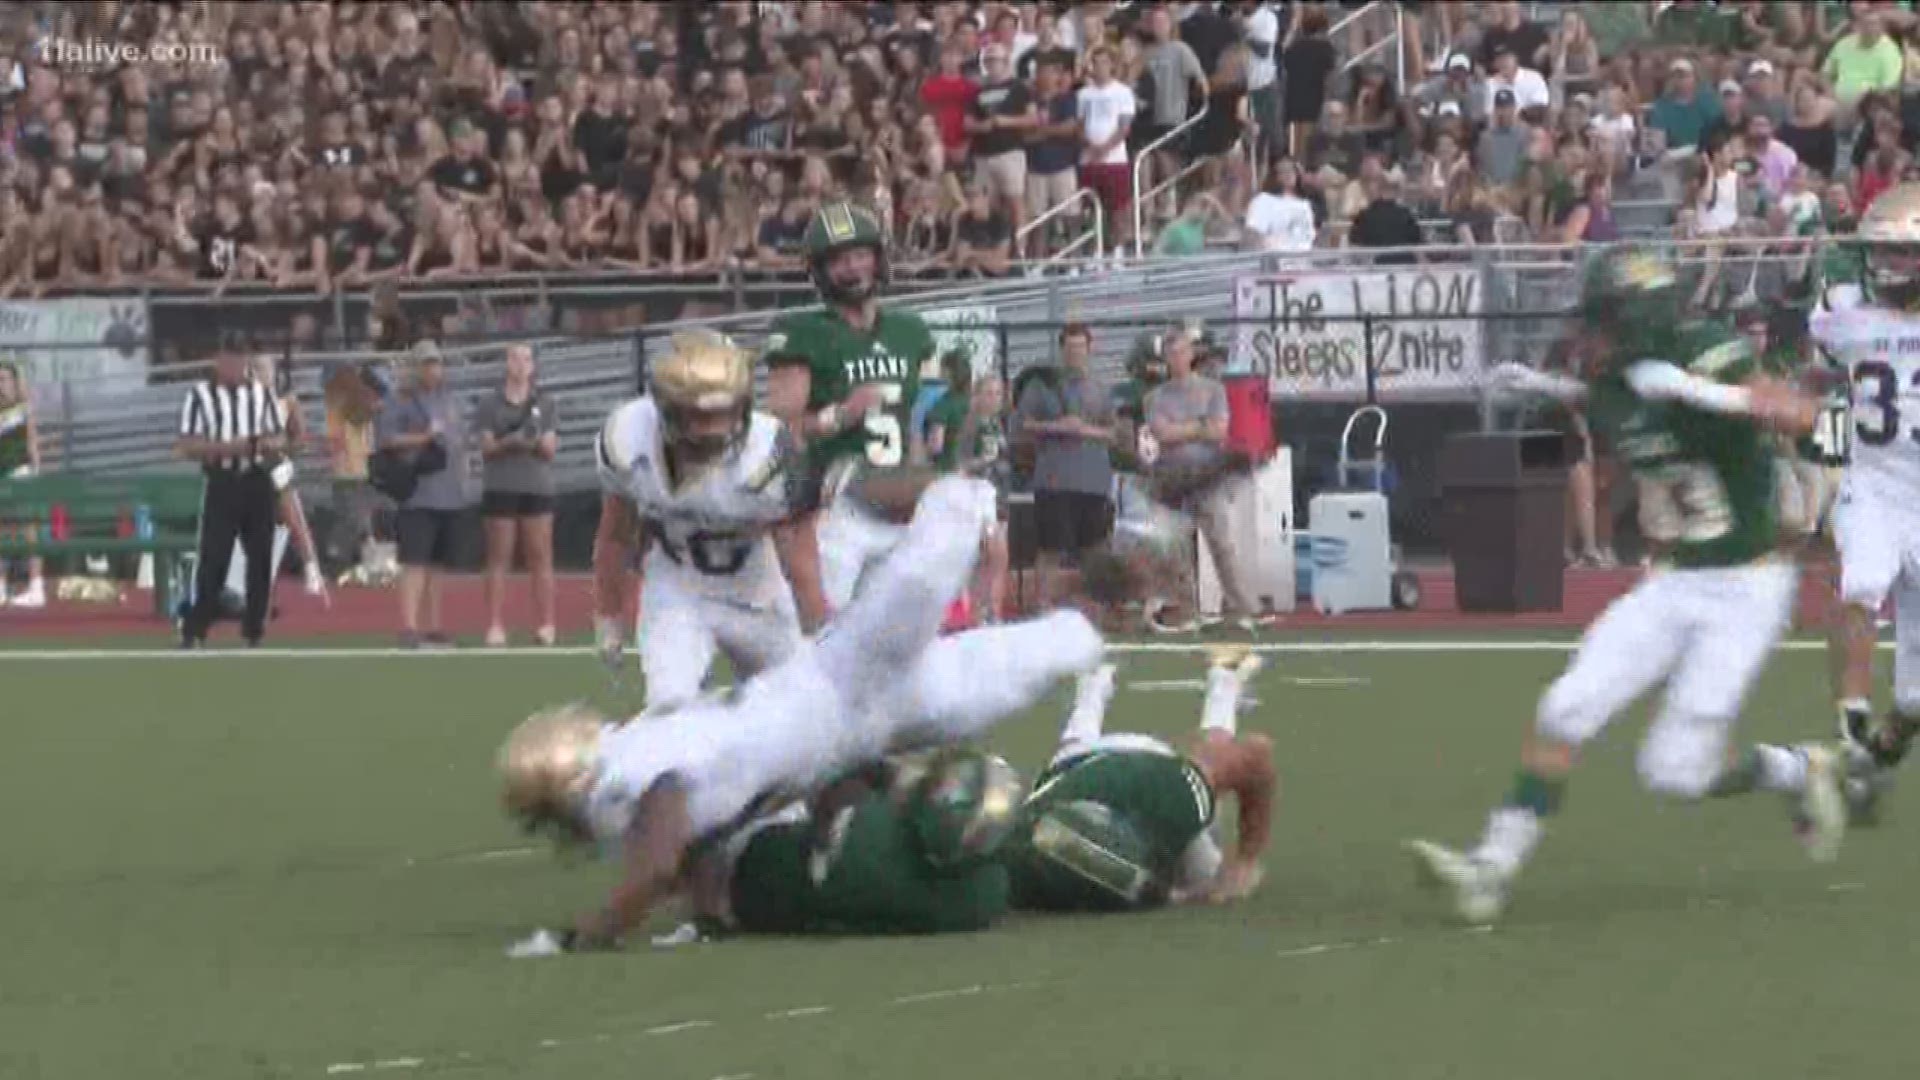 Highlights from the August 23 game. Blessed Trinity wins, 28-10.